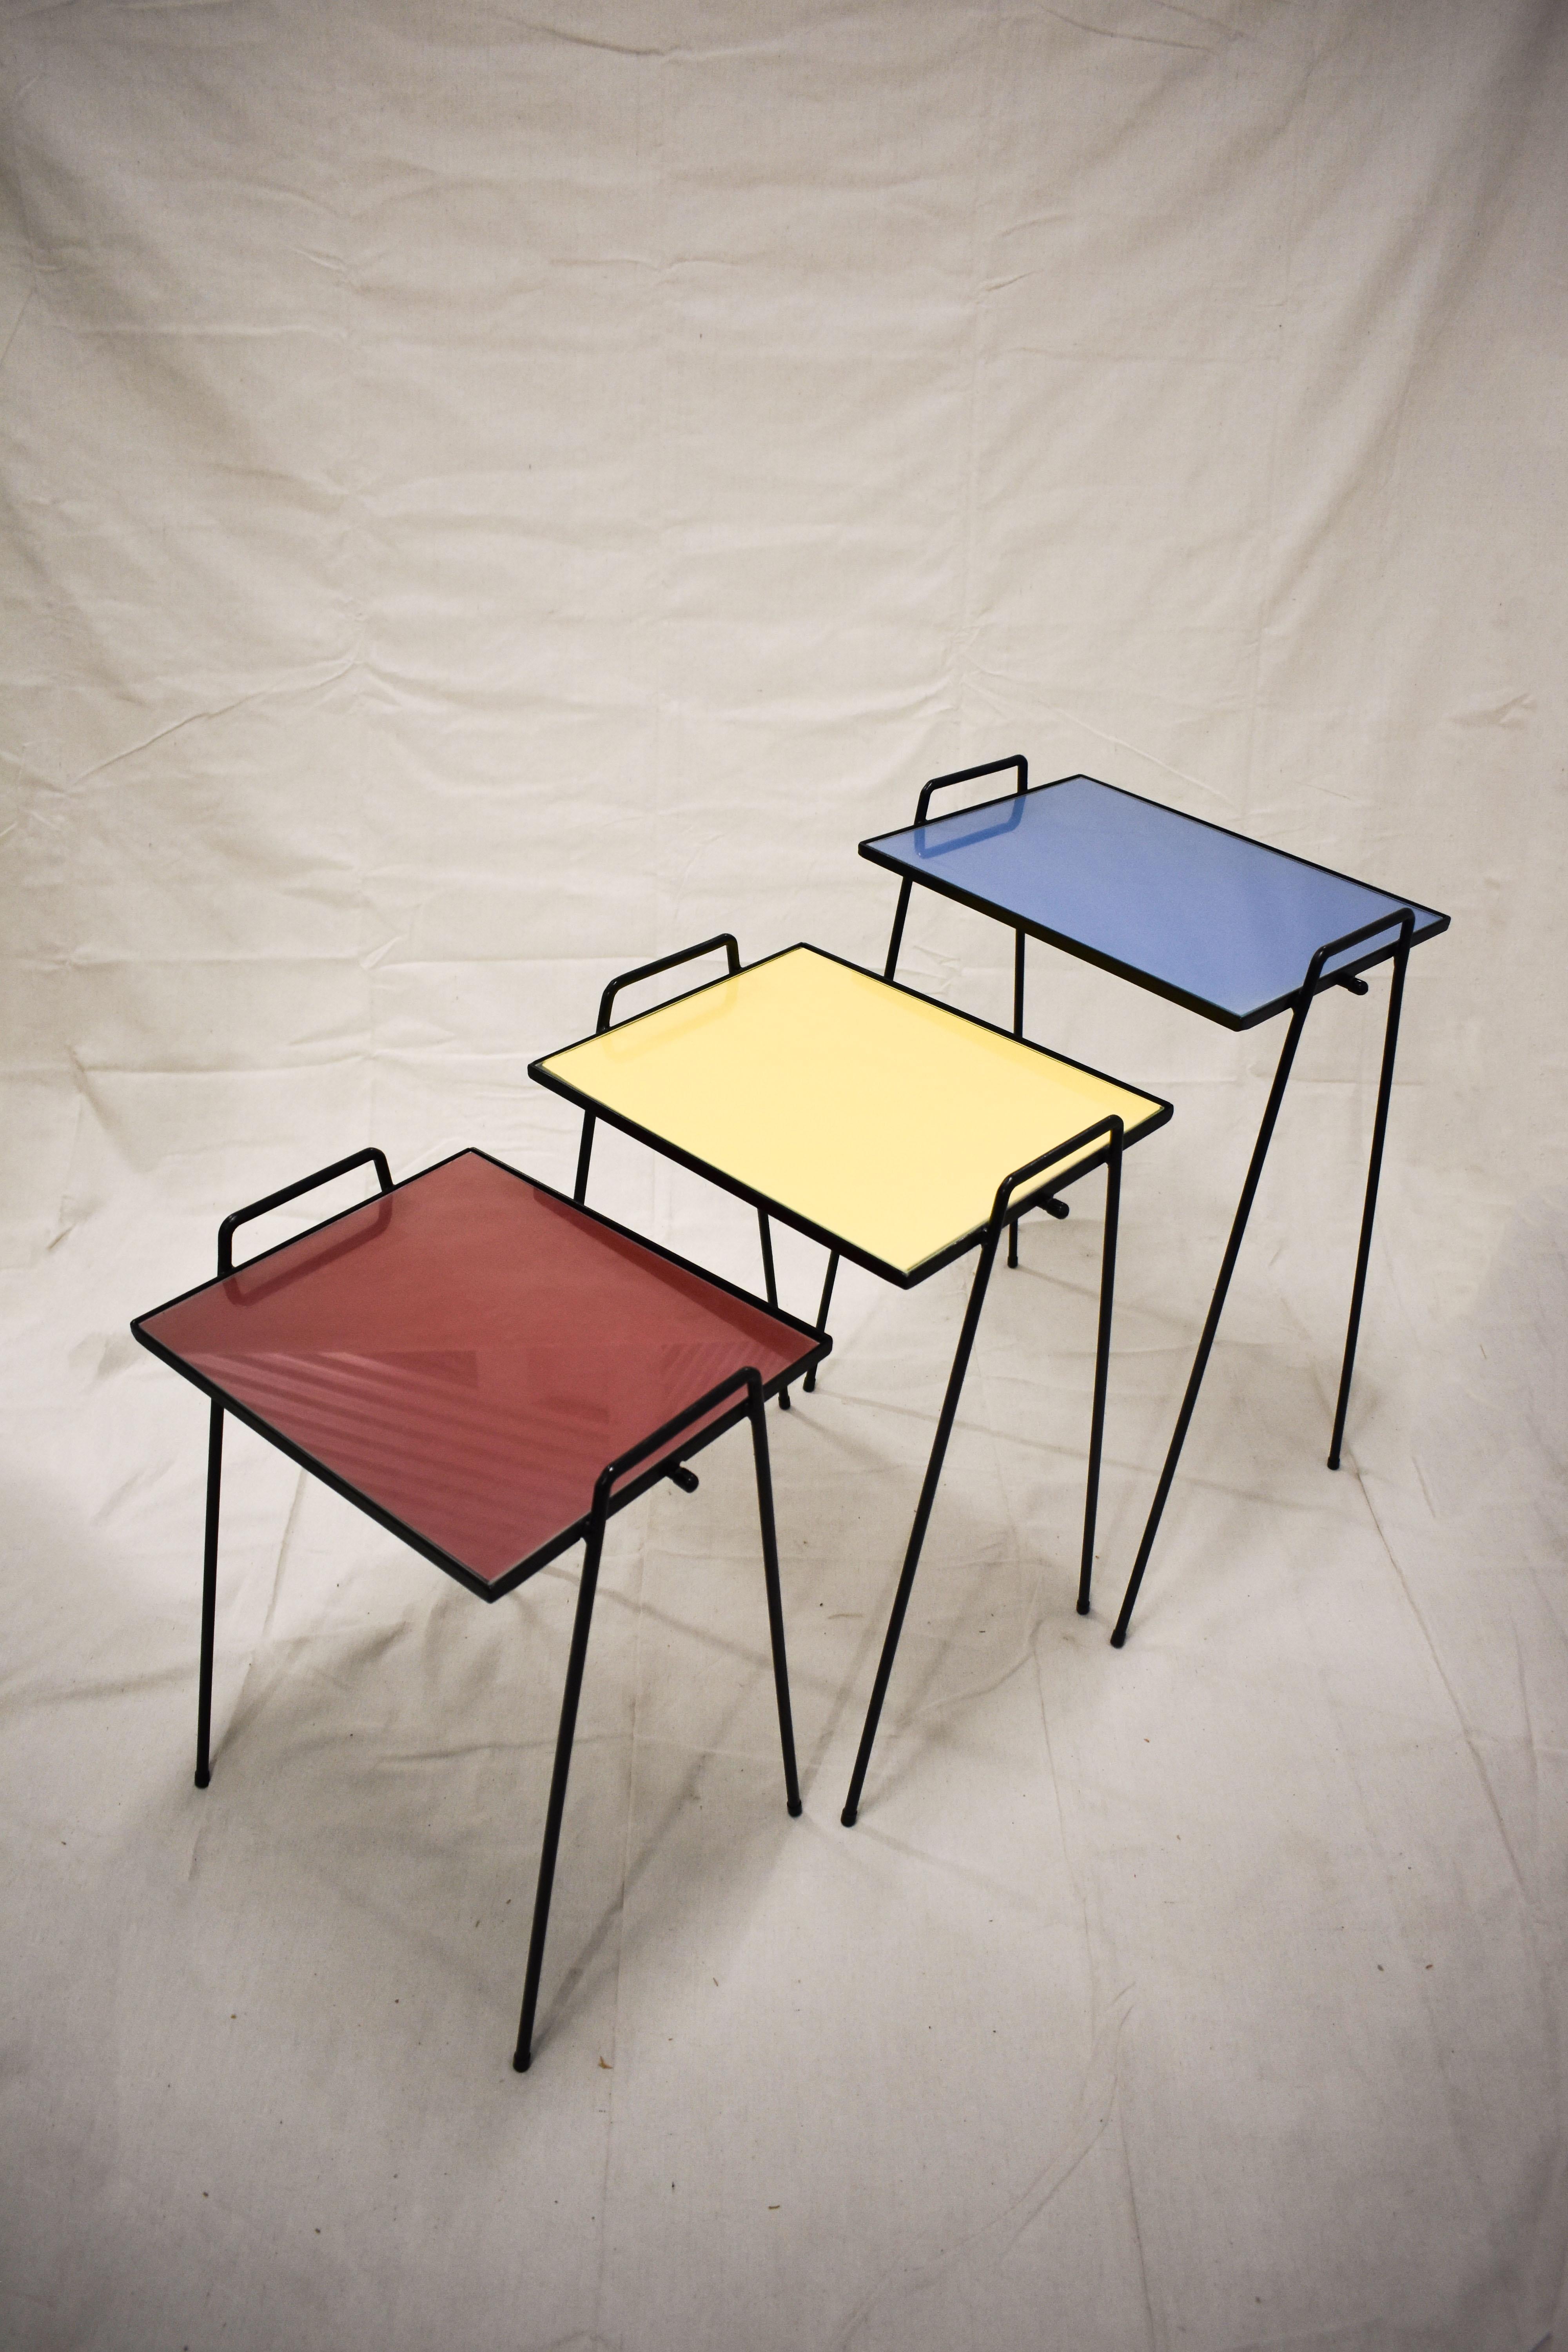 These cute, mid-century colorful nesting tables are ready for your next groovy cocktail party.  They conveniently stack to take up minimal space but then come out to make a colorful statement at any party.  The iron frames have been repainted and